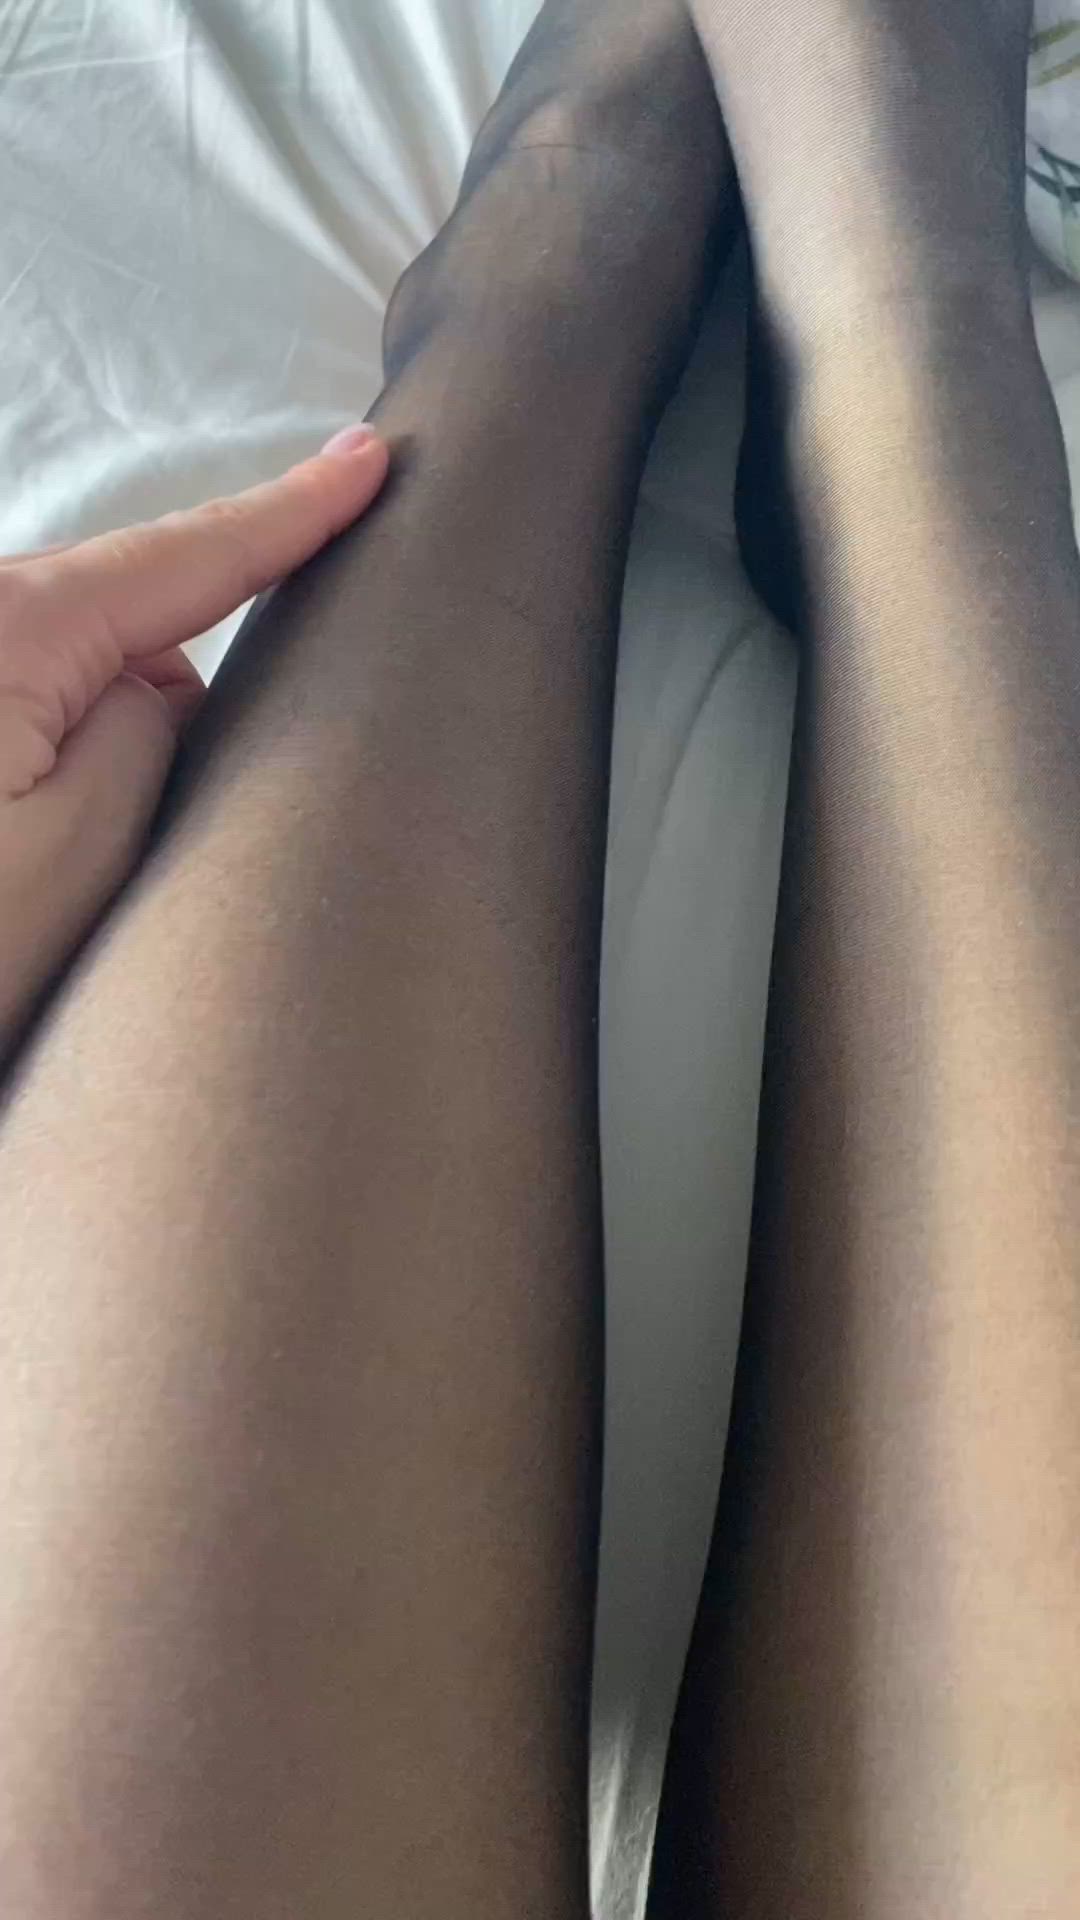 Amateur porn video with onlyfans model powderyrosee <strong>@powderyrose</strong>